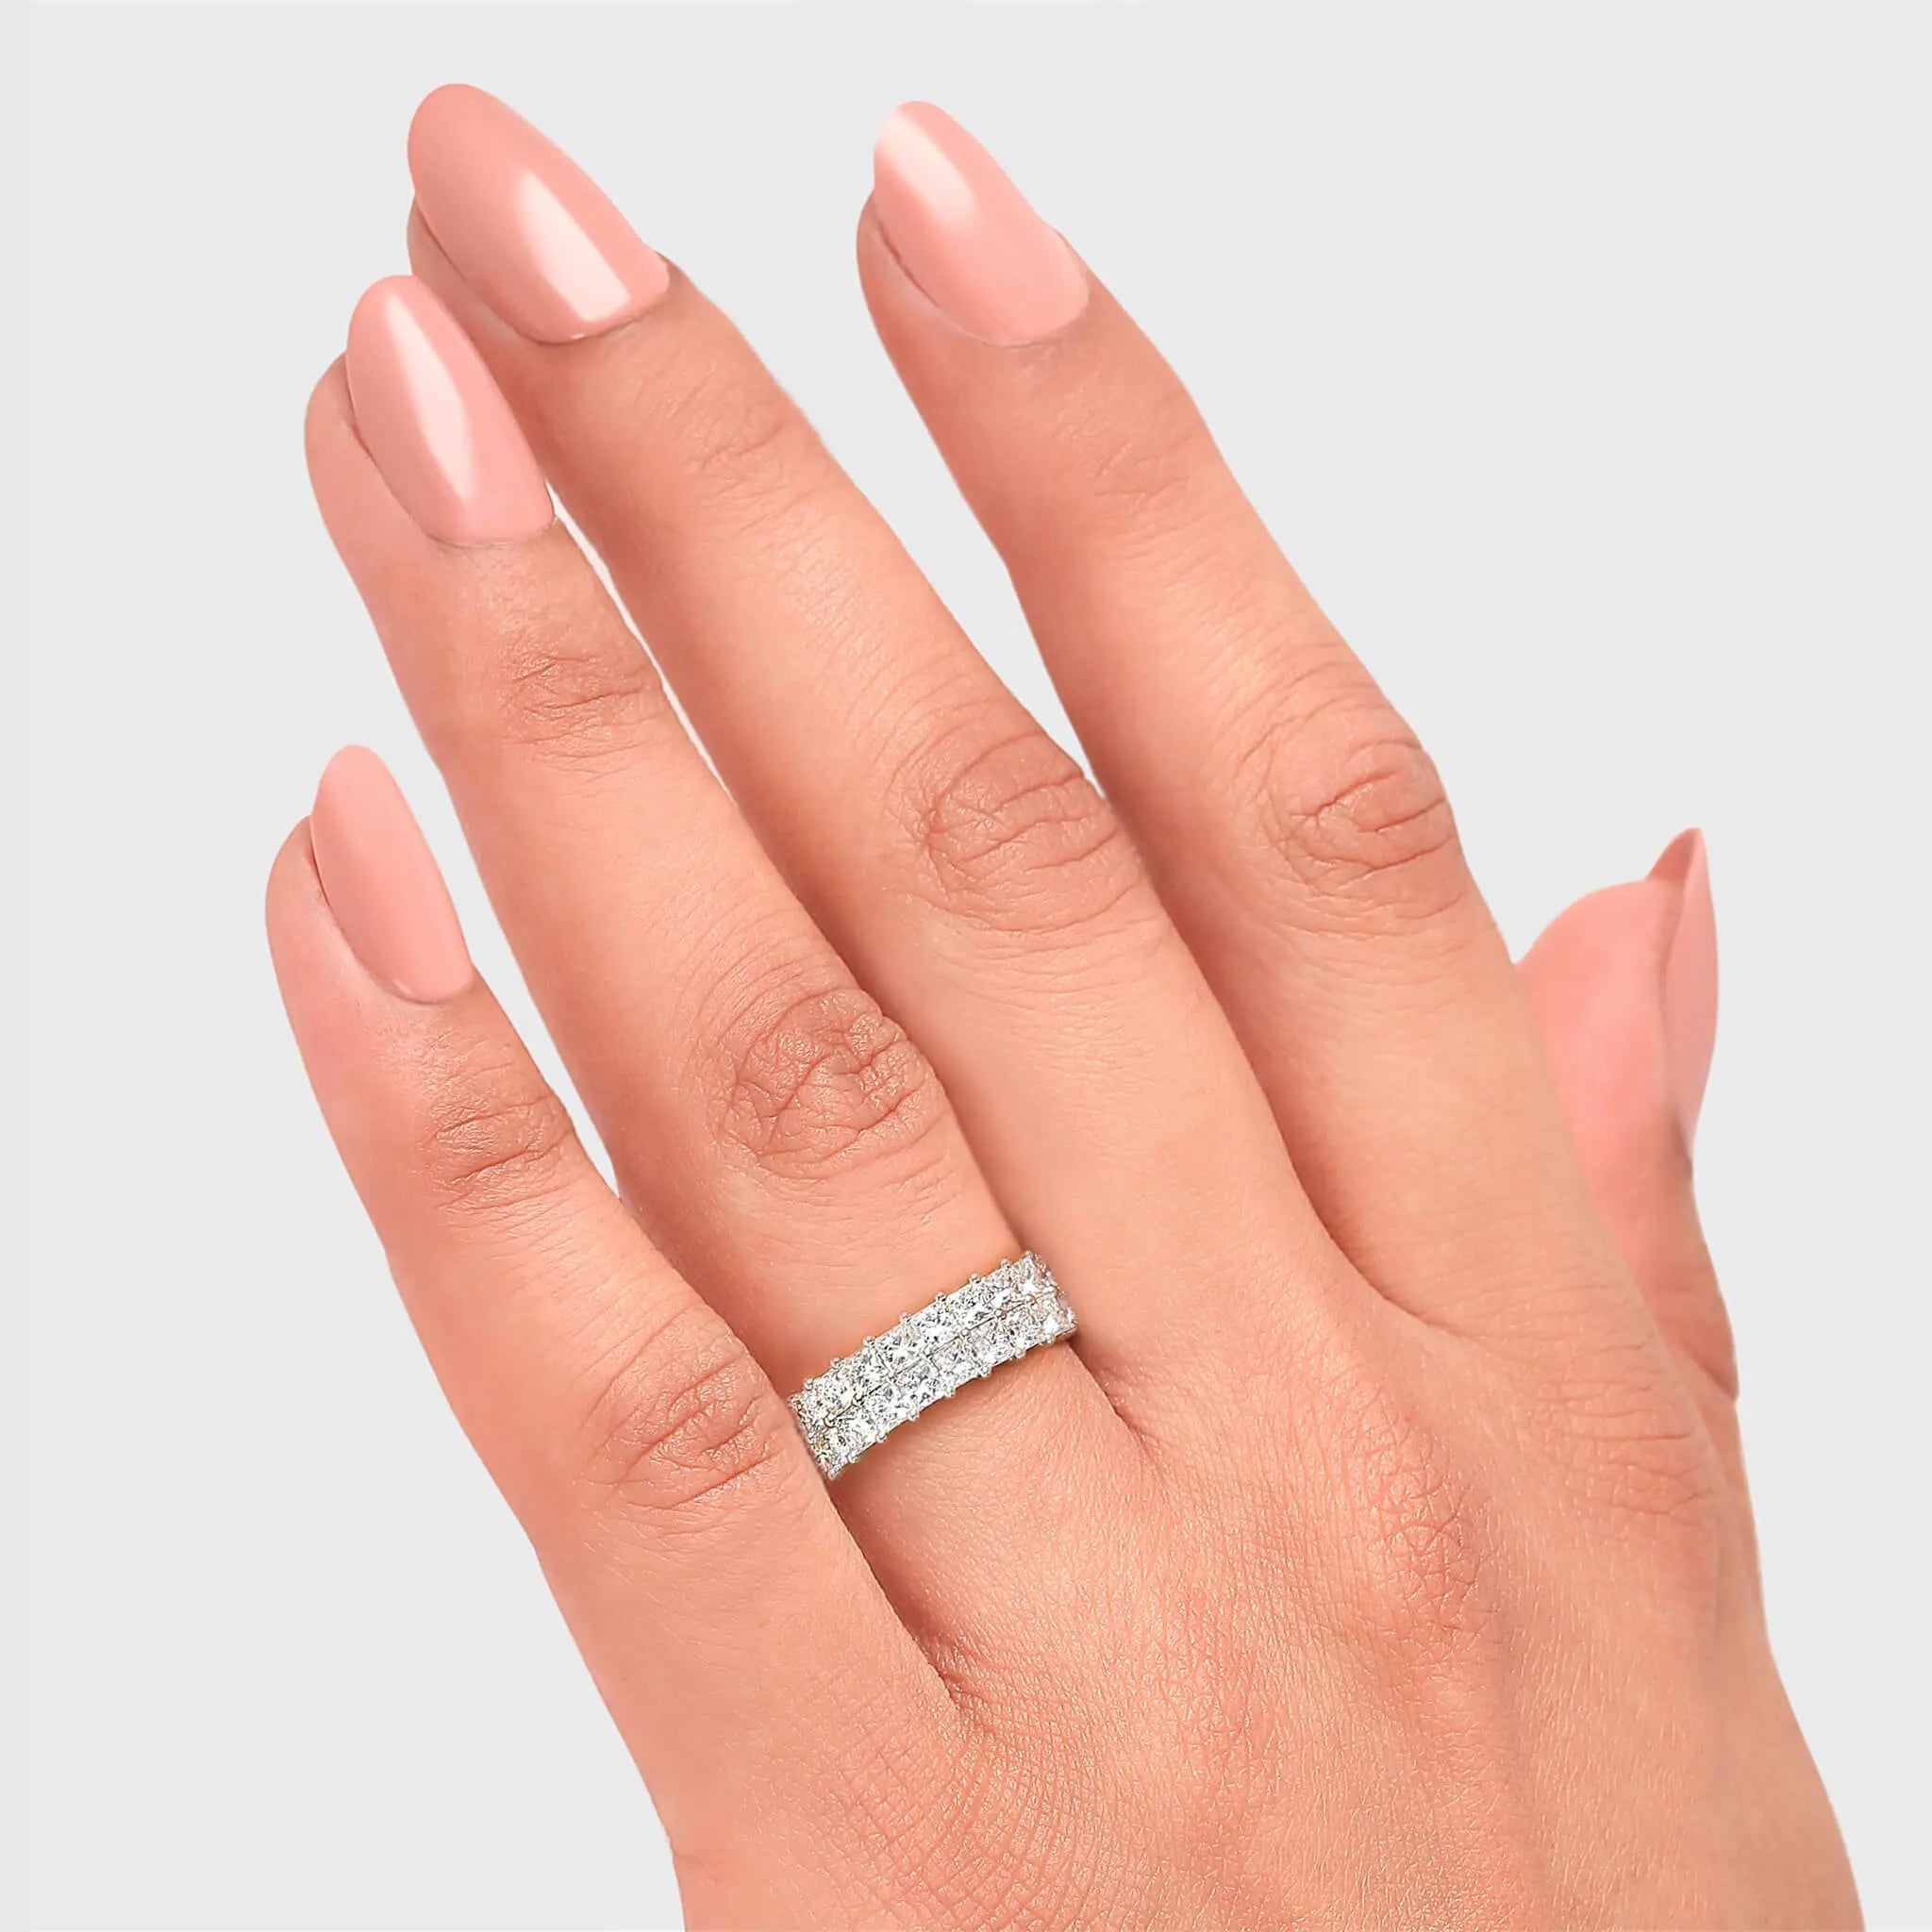 Shimansky - Women Wearing the My Girl 2 Row Full Eternity Diamond Ring 4.00ct Crafted in 18K White Gold